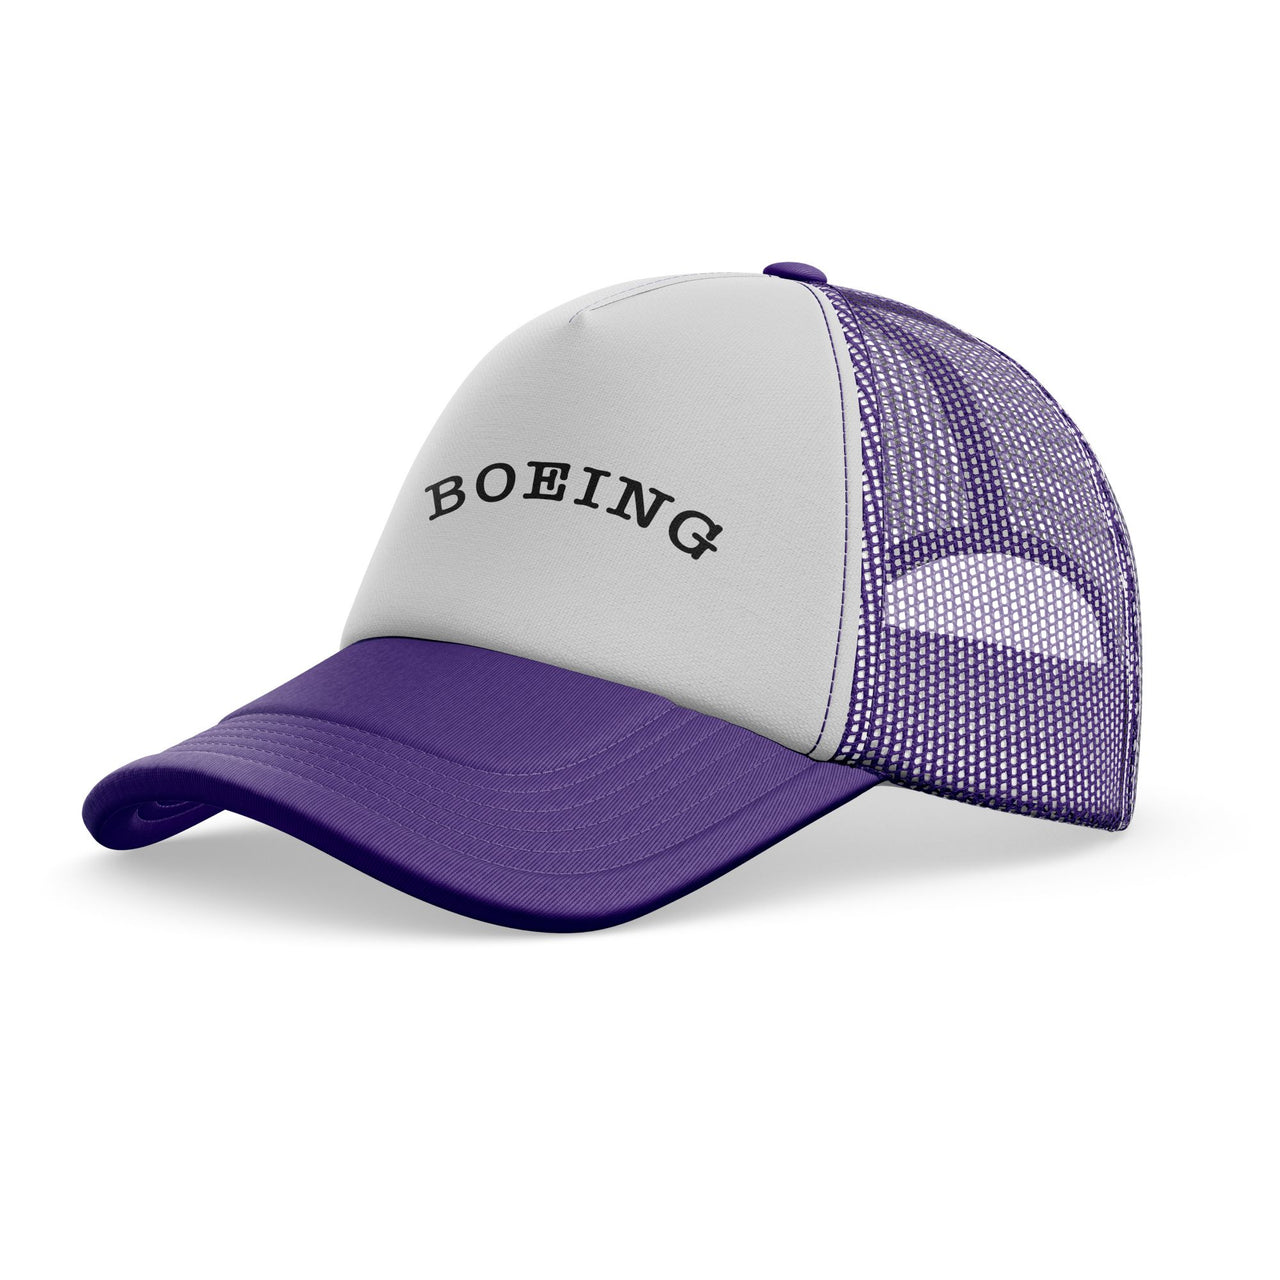 Special BOEING Text Designed Trucker Caps & Hats